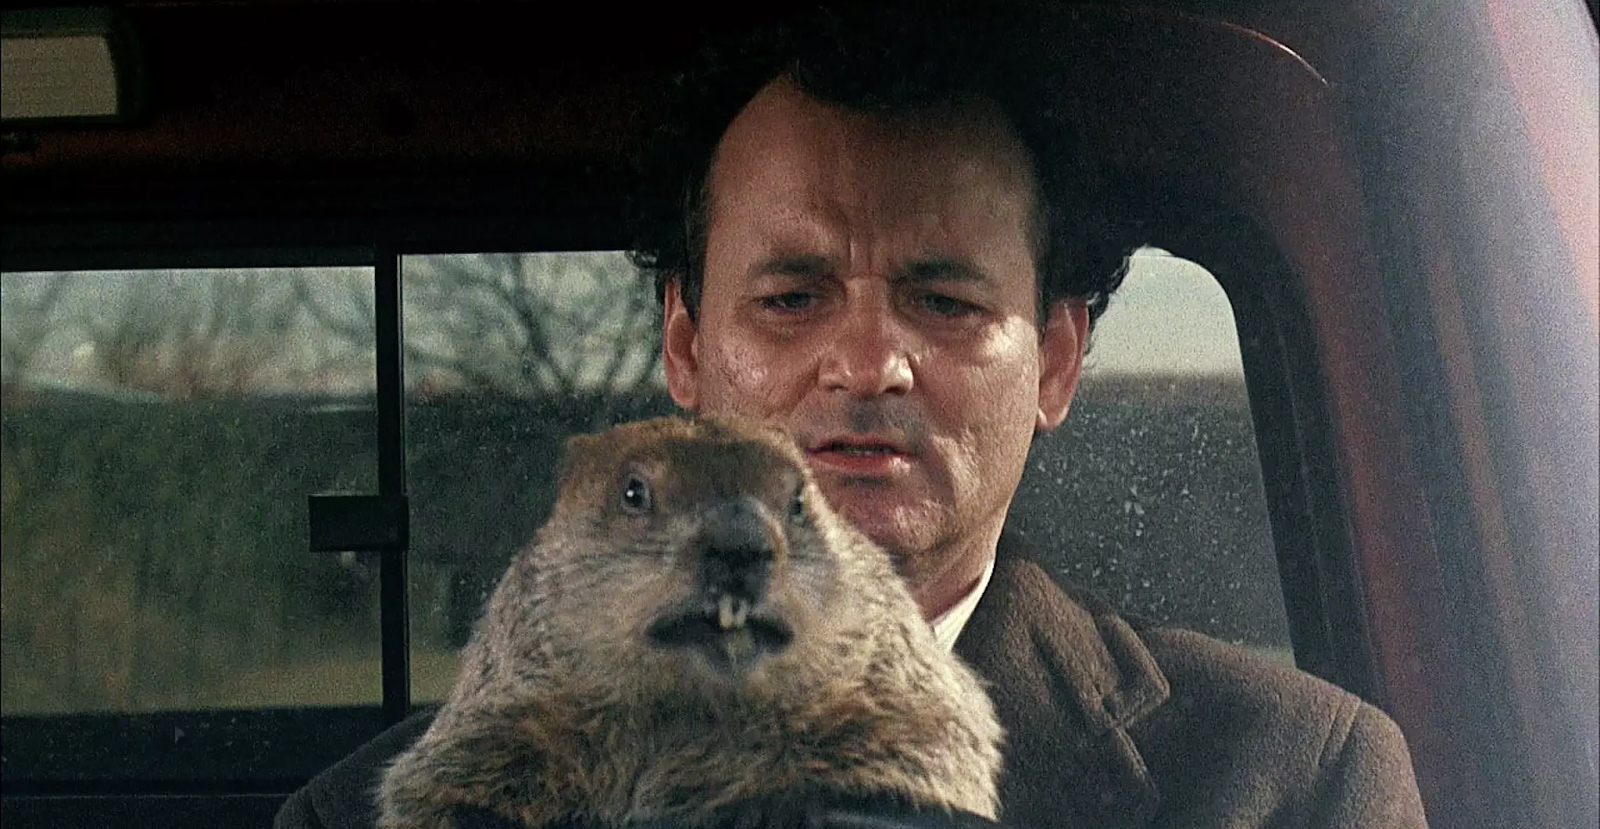 This is a screen still from Groundhog Day. Bill Murray is sitting in the front seat of a car with a groundhog in his lap.